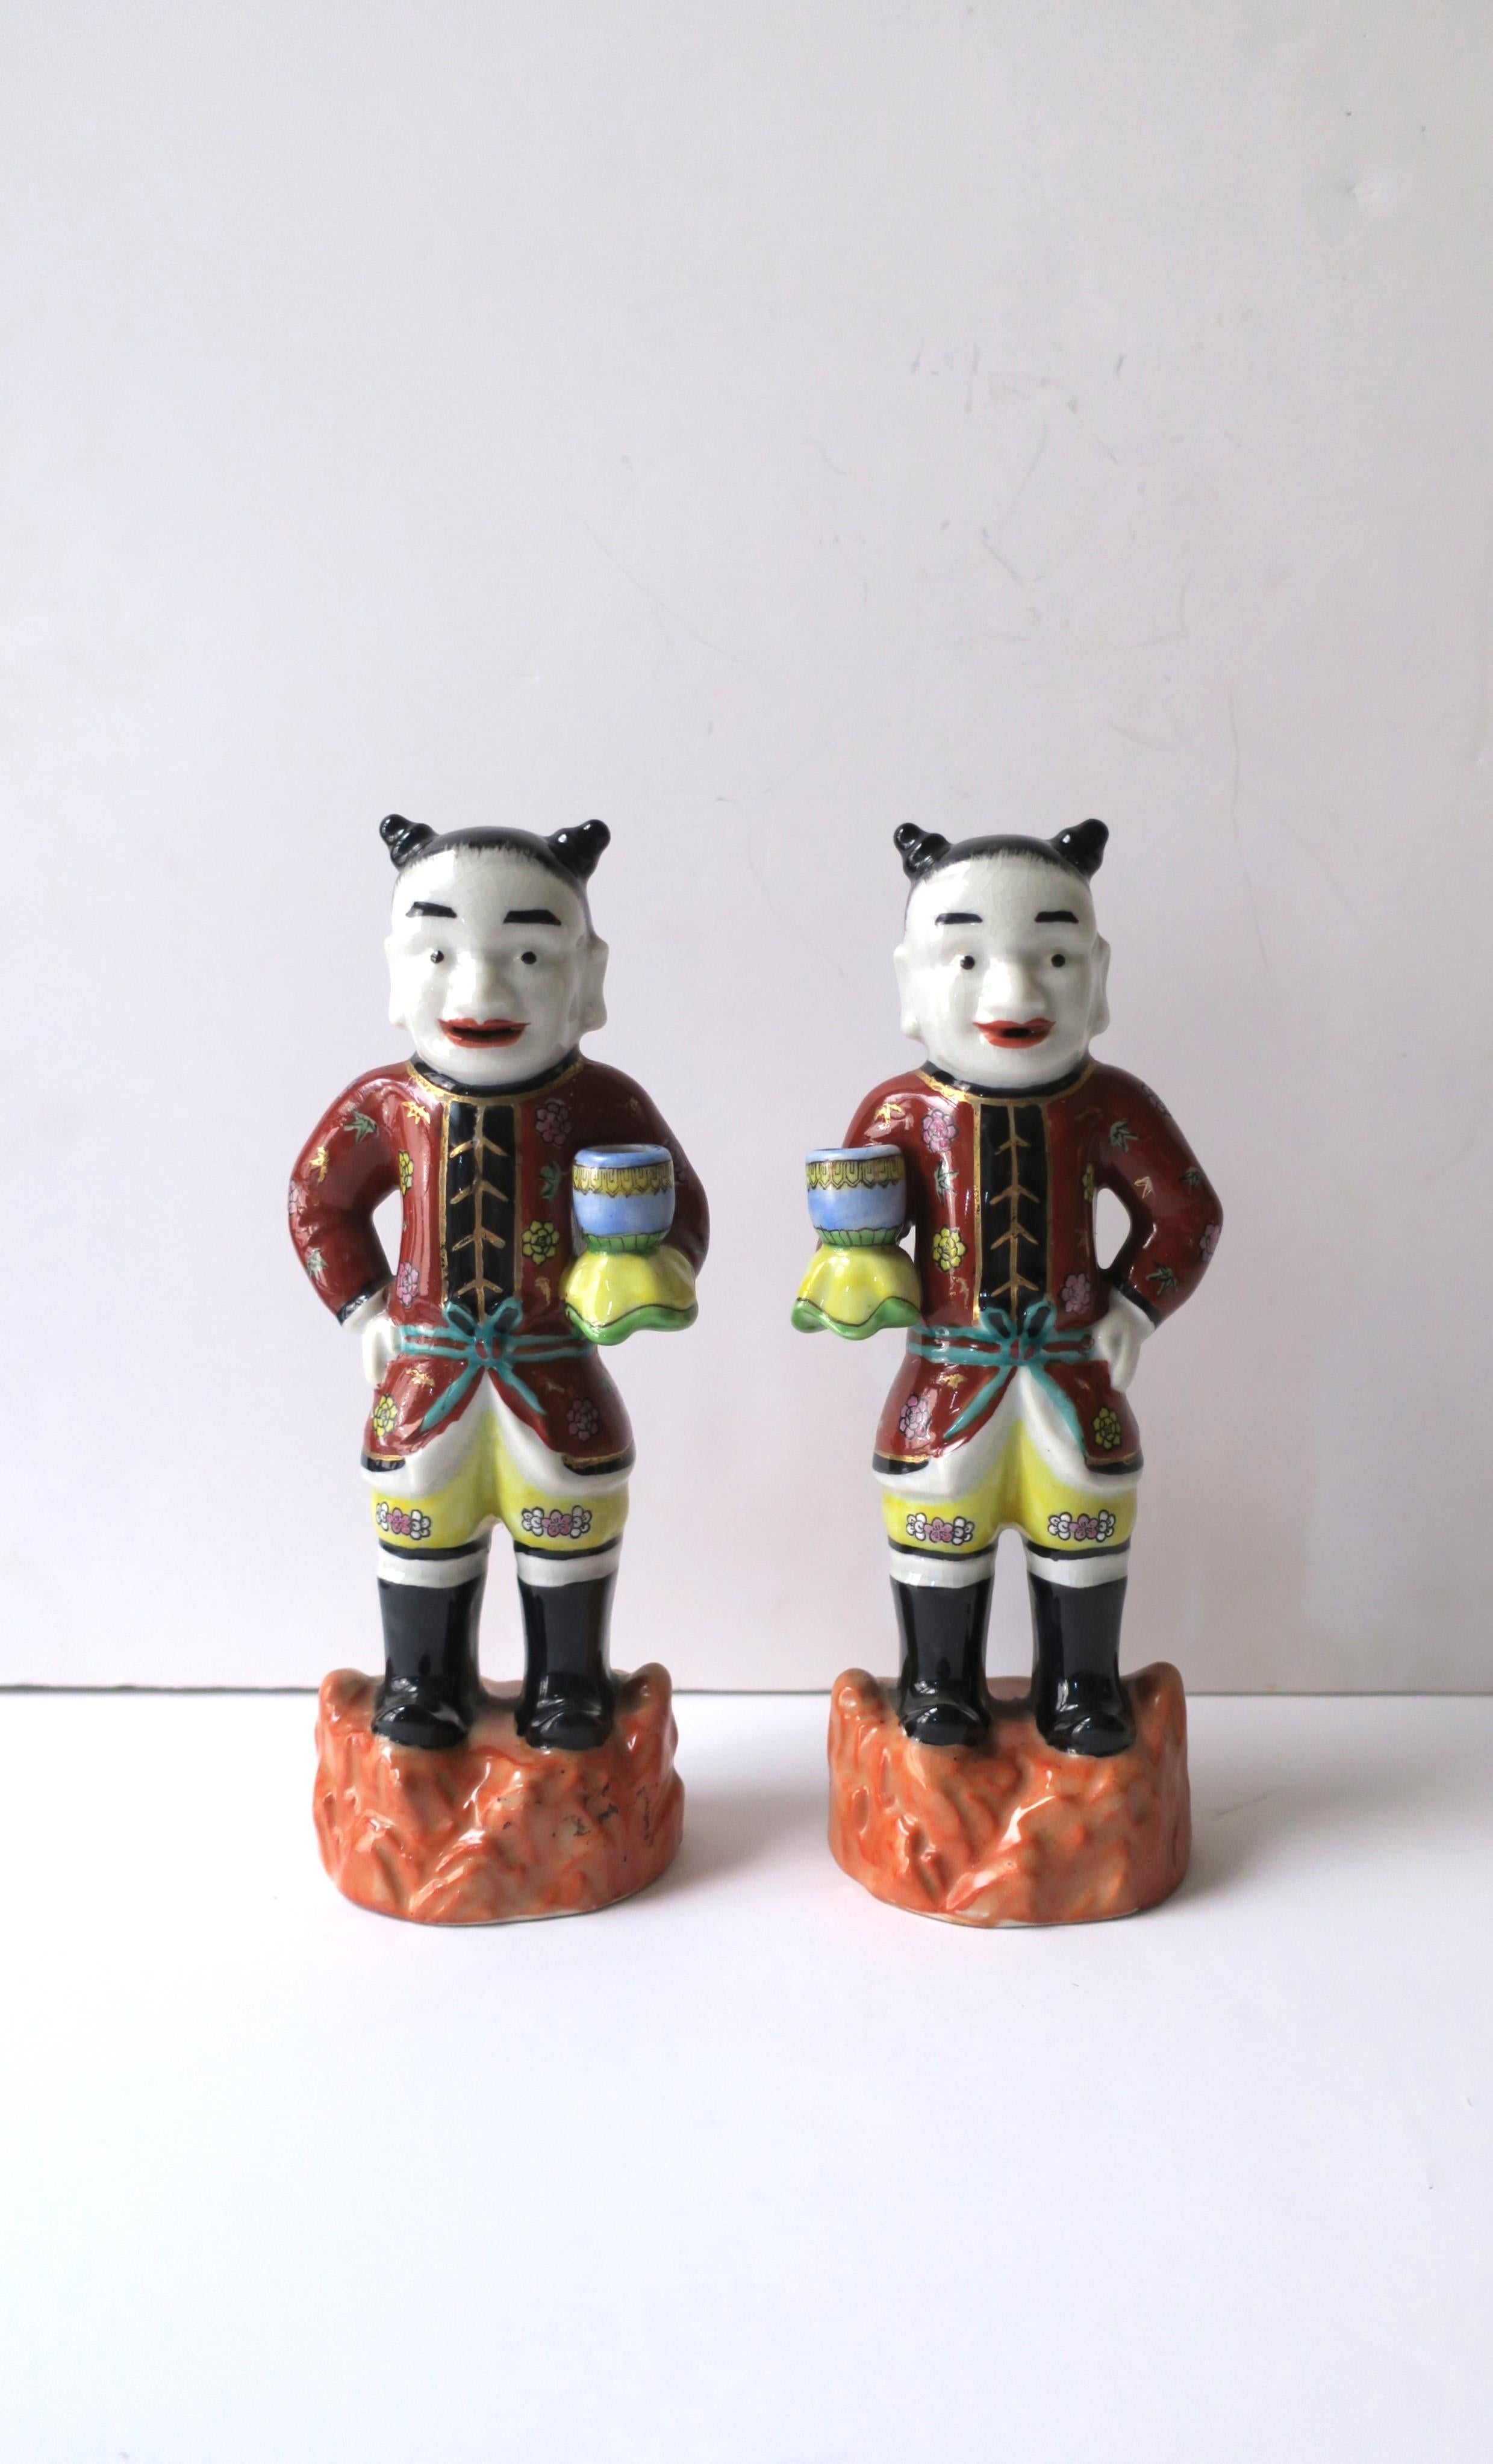 A beautiful pair of hand-painted ceramic Asian male figures, Chinoiserie style, circa mid-20th century, British Hong Kong. Hand painted in both rich and bright colors highlighting their formal attire and ceremonial cup. Pieces are beautifully